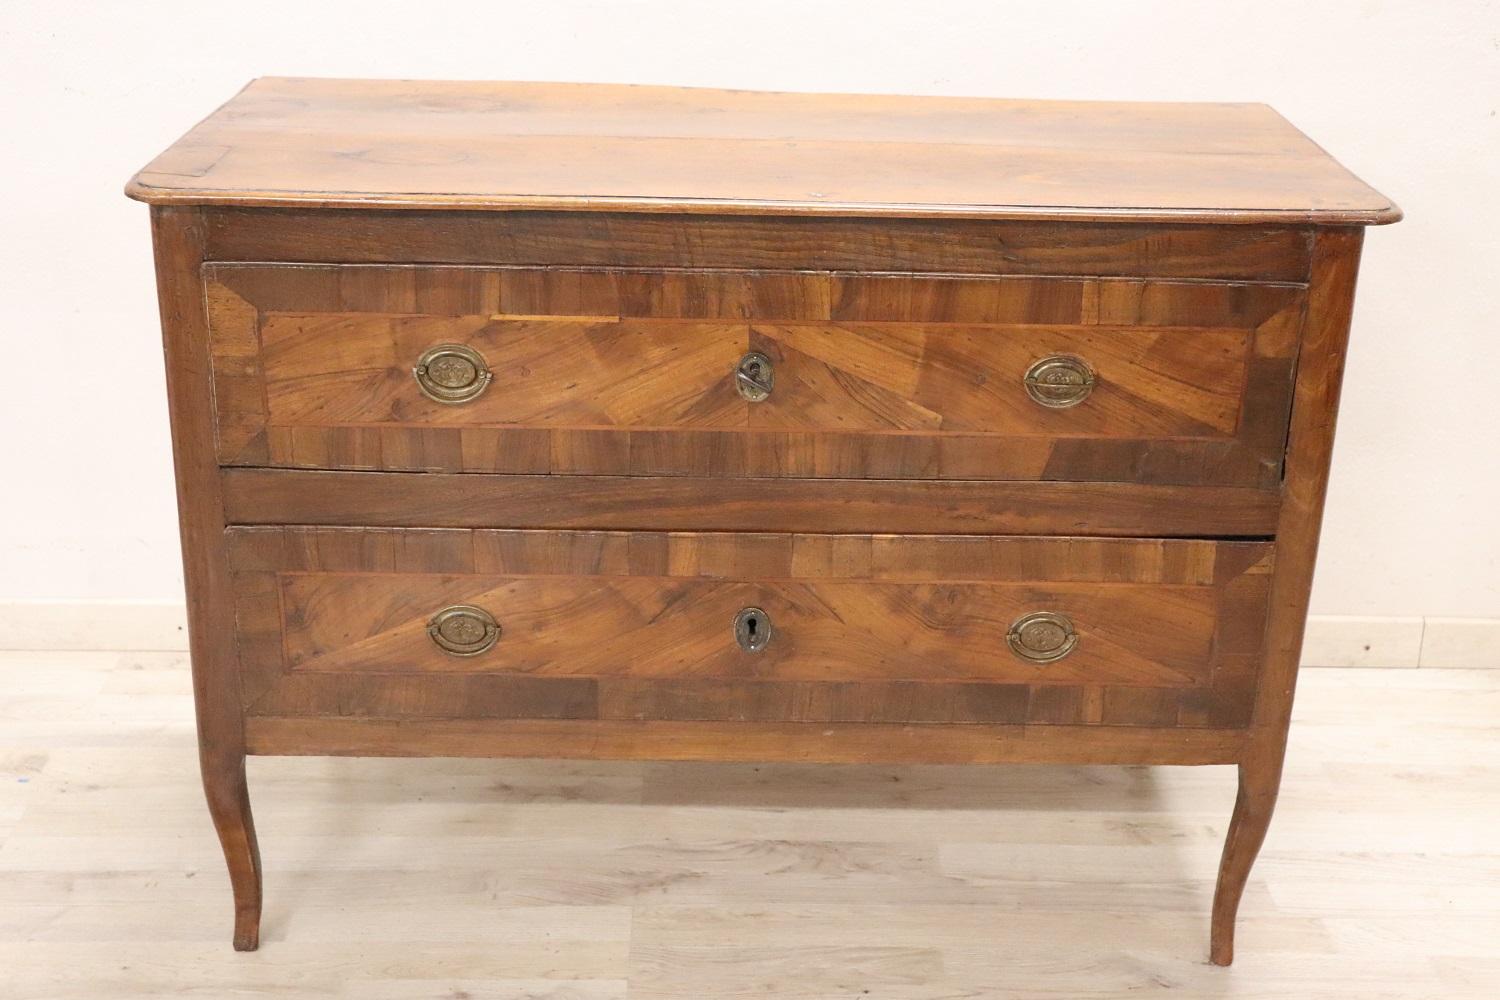 Important and rare antique Italian of the period Louis XV chest of drawers, 1750. On the front two useful drawers. Featuring a beautiful shade of walnut with decoration on the front of the drawers, slender and wavy legs.  Due to its small size, it